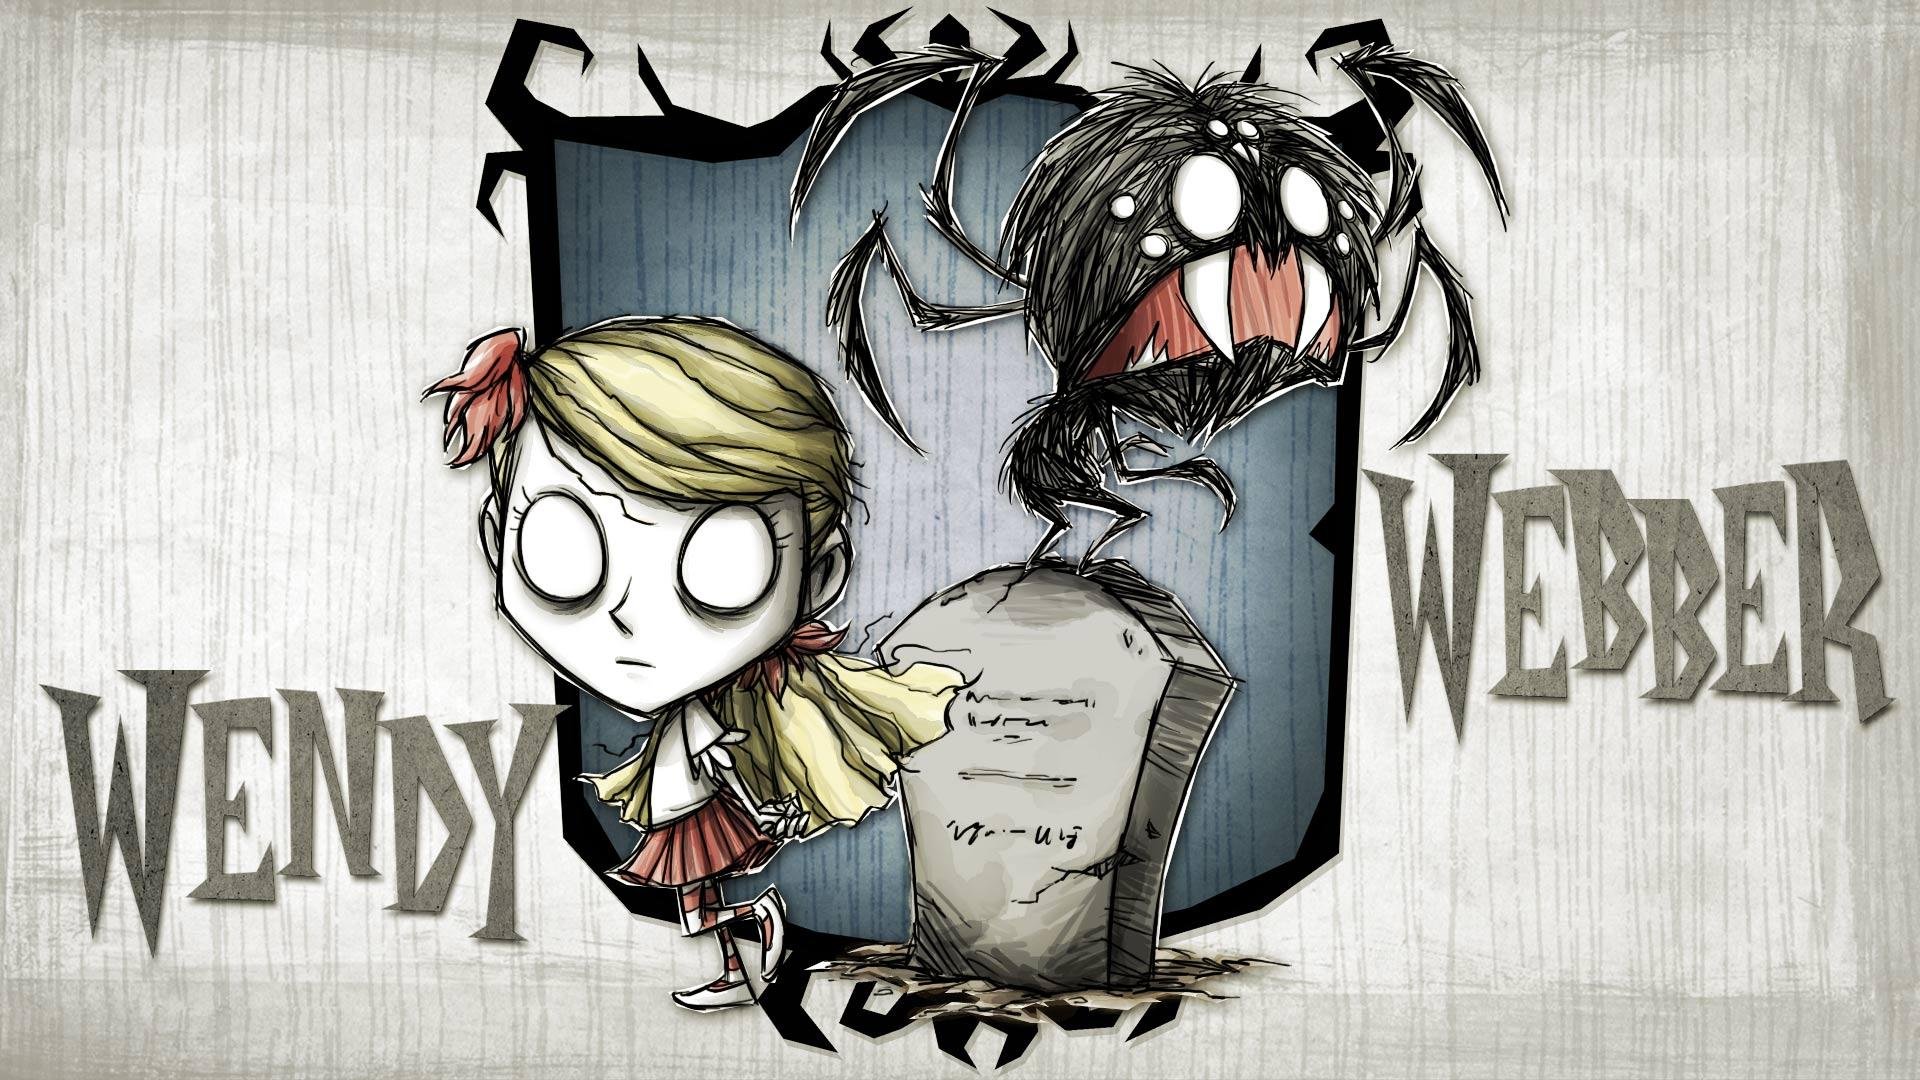 Don t scary. Вебер don't Starve. Don't Starve together Веббер арт.